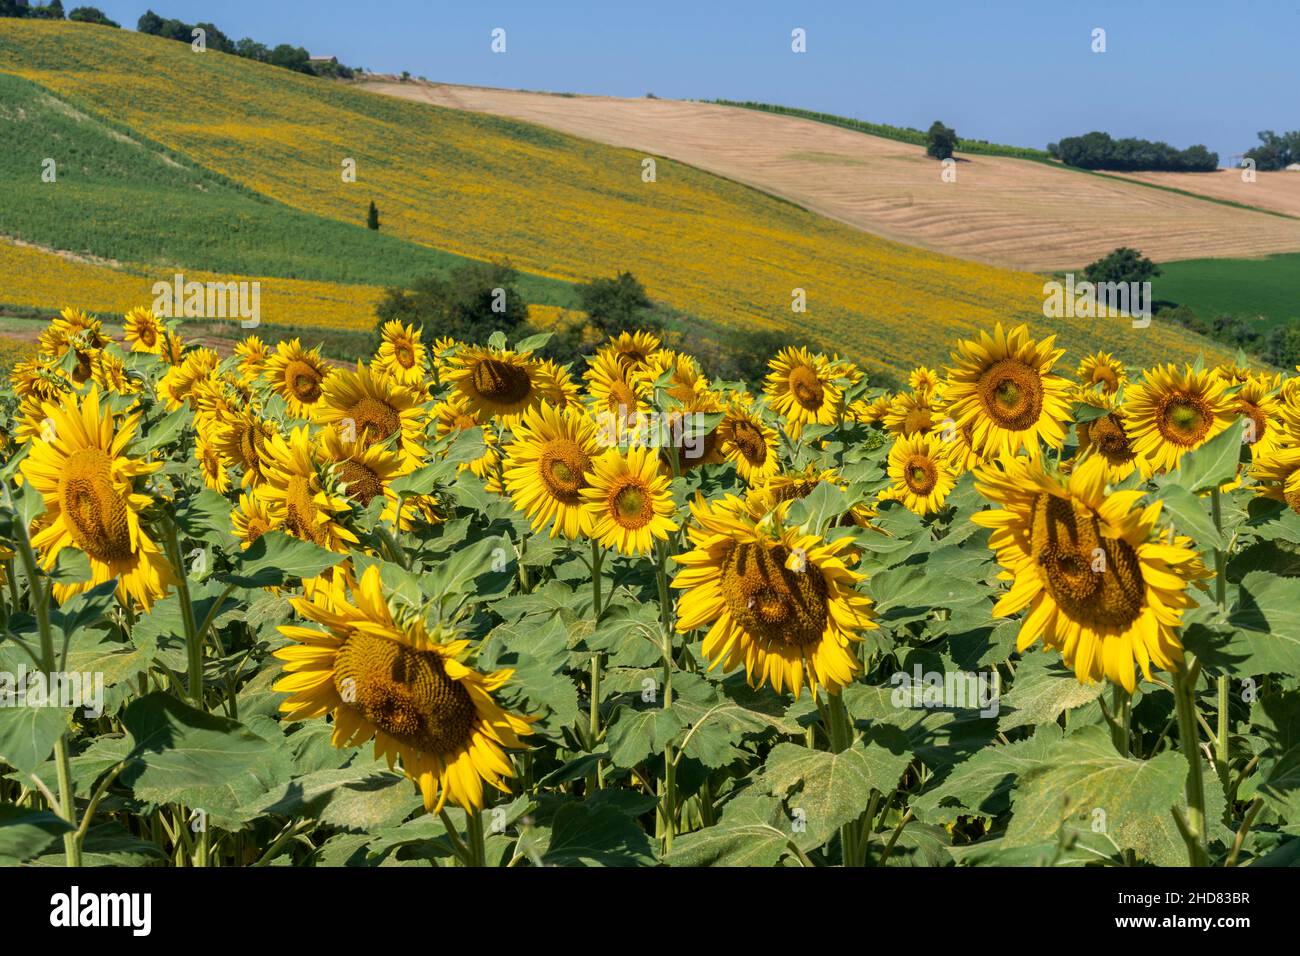 Countryside, Field of Sunflowers, Corridonia, Marche, Italy, Europe Stock Photo